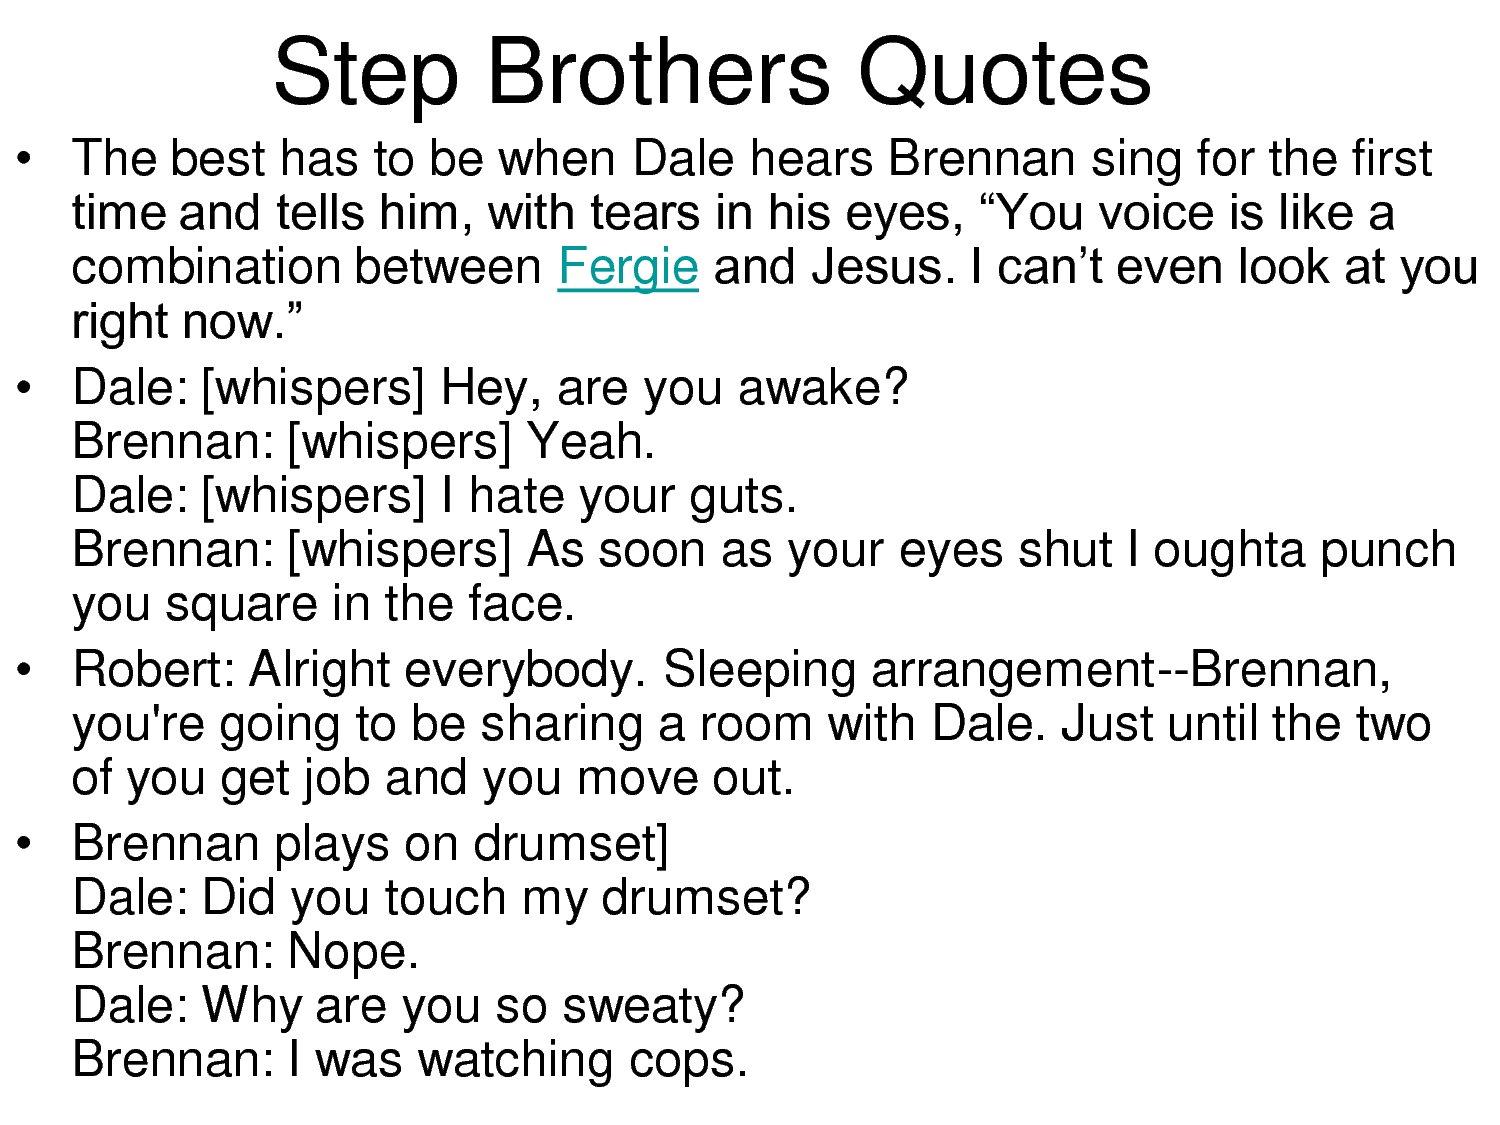 Funny Step Brother Quotes.